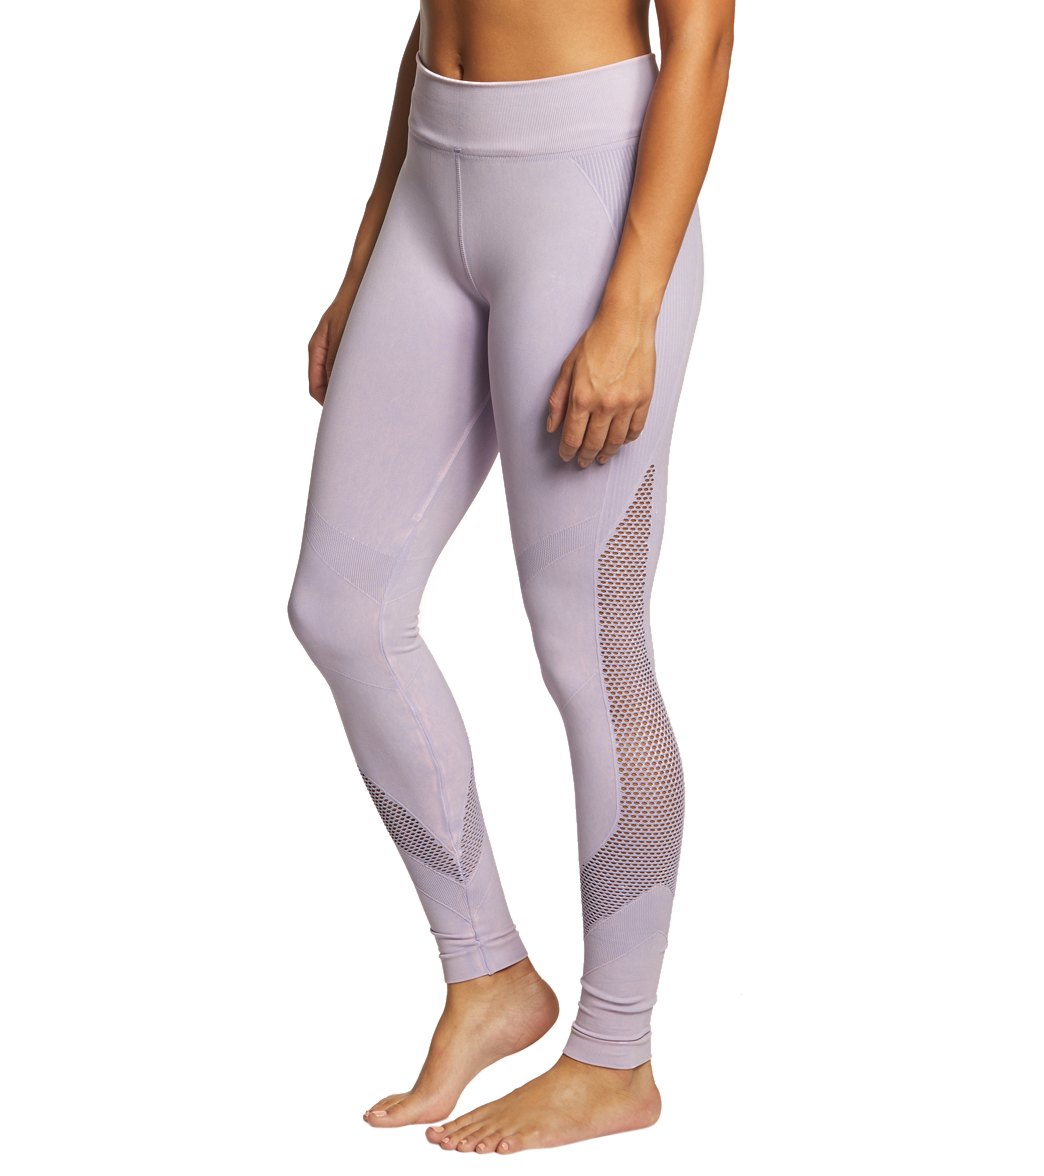 NUX Network Mineral Wash Seamless Yoga Leggings, Nux Mineral Wash Leggings